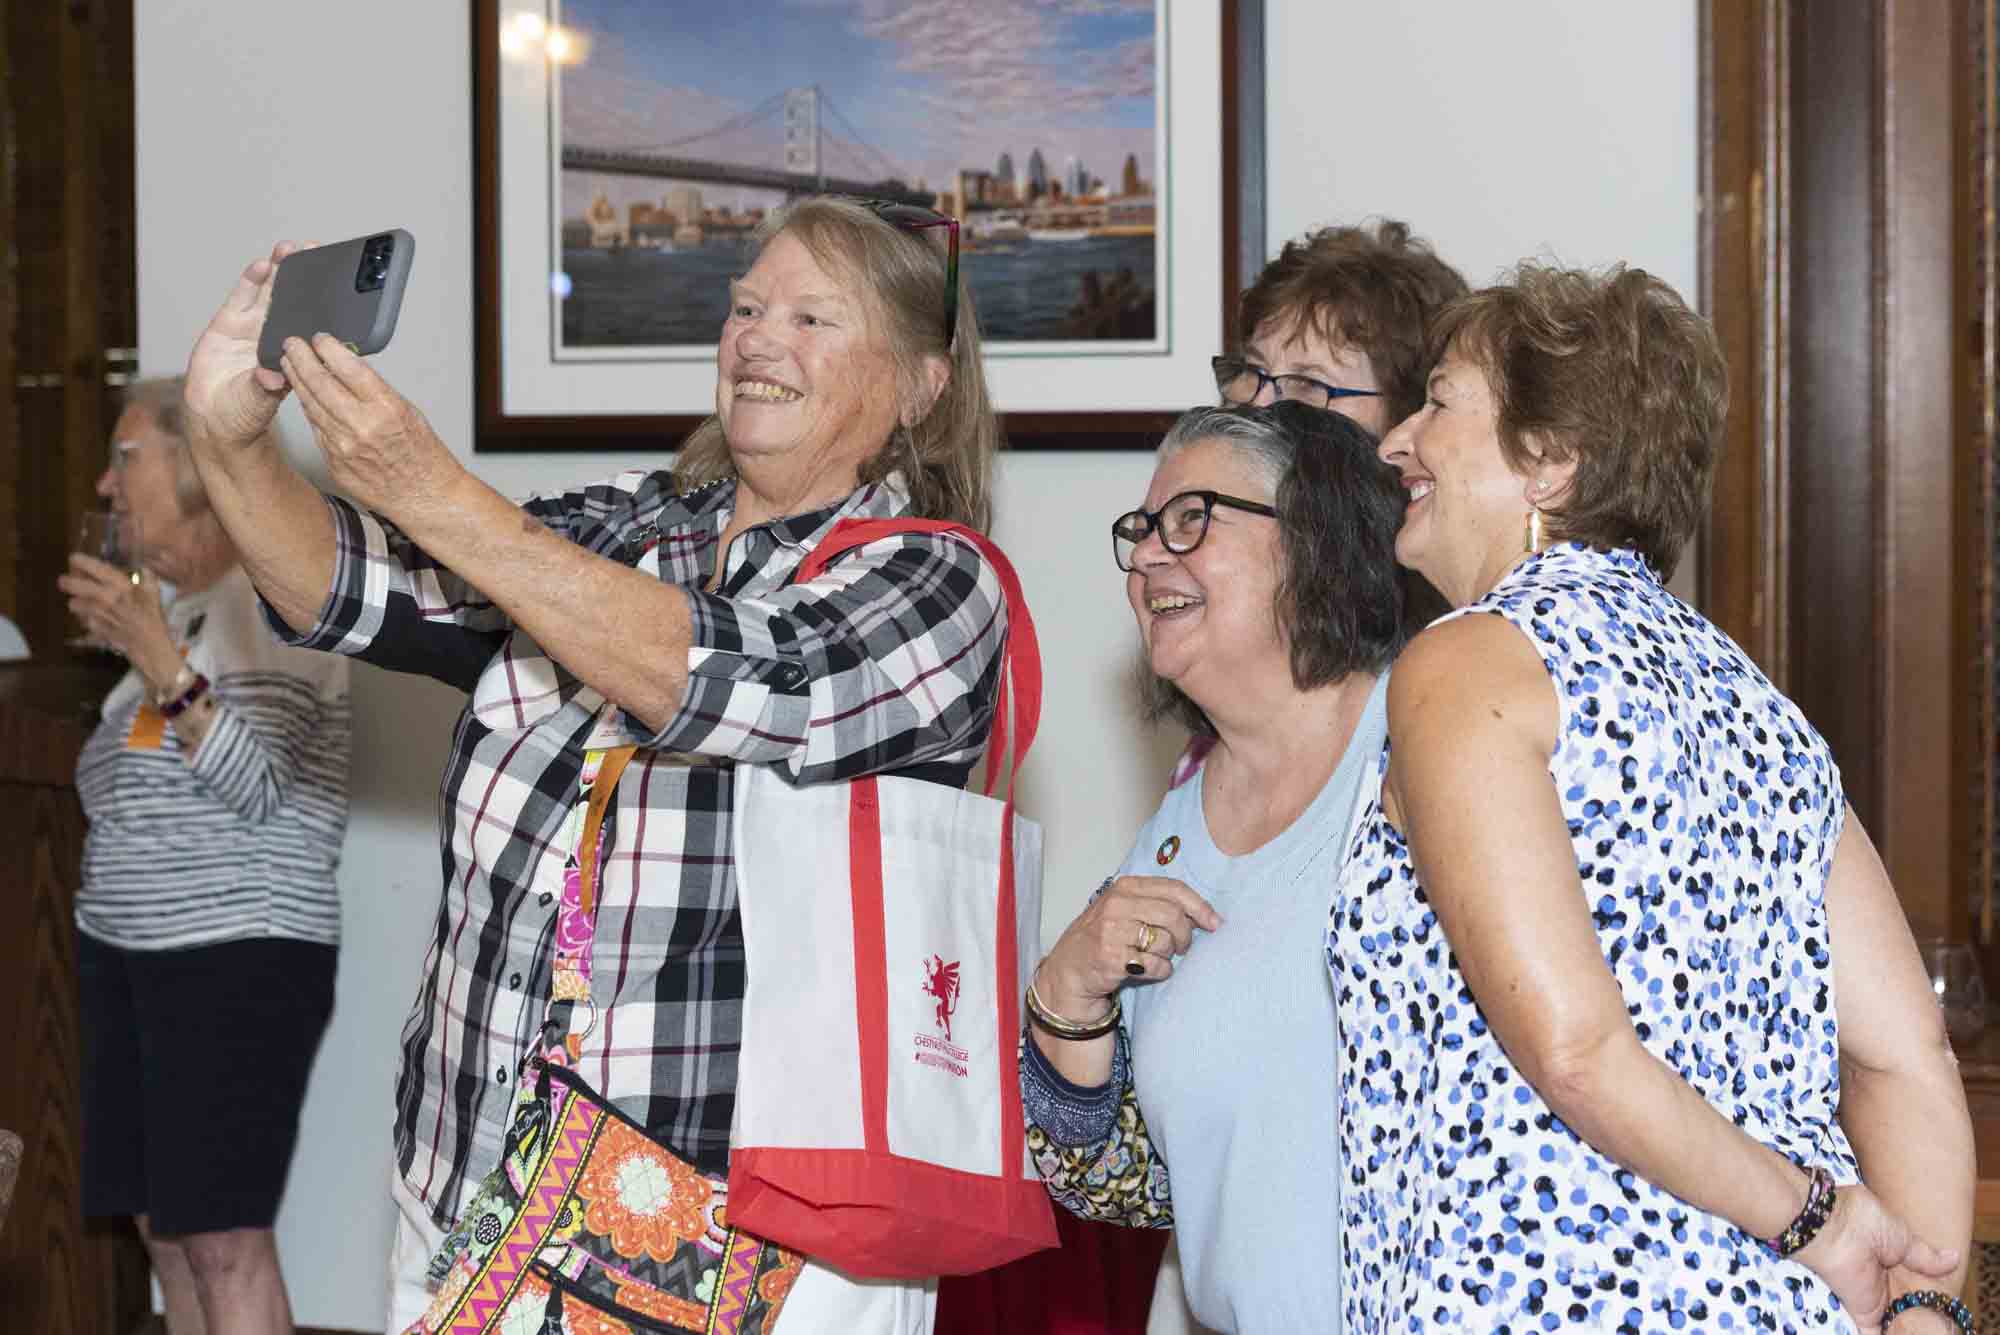 Reunion attendees stop to take a selfie before kickstarting the festivities.